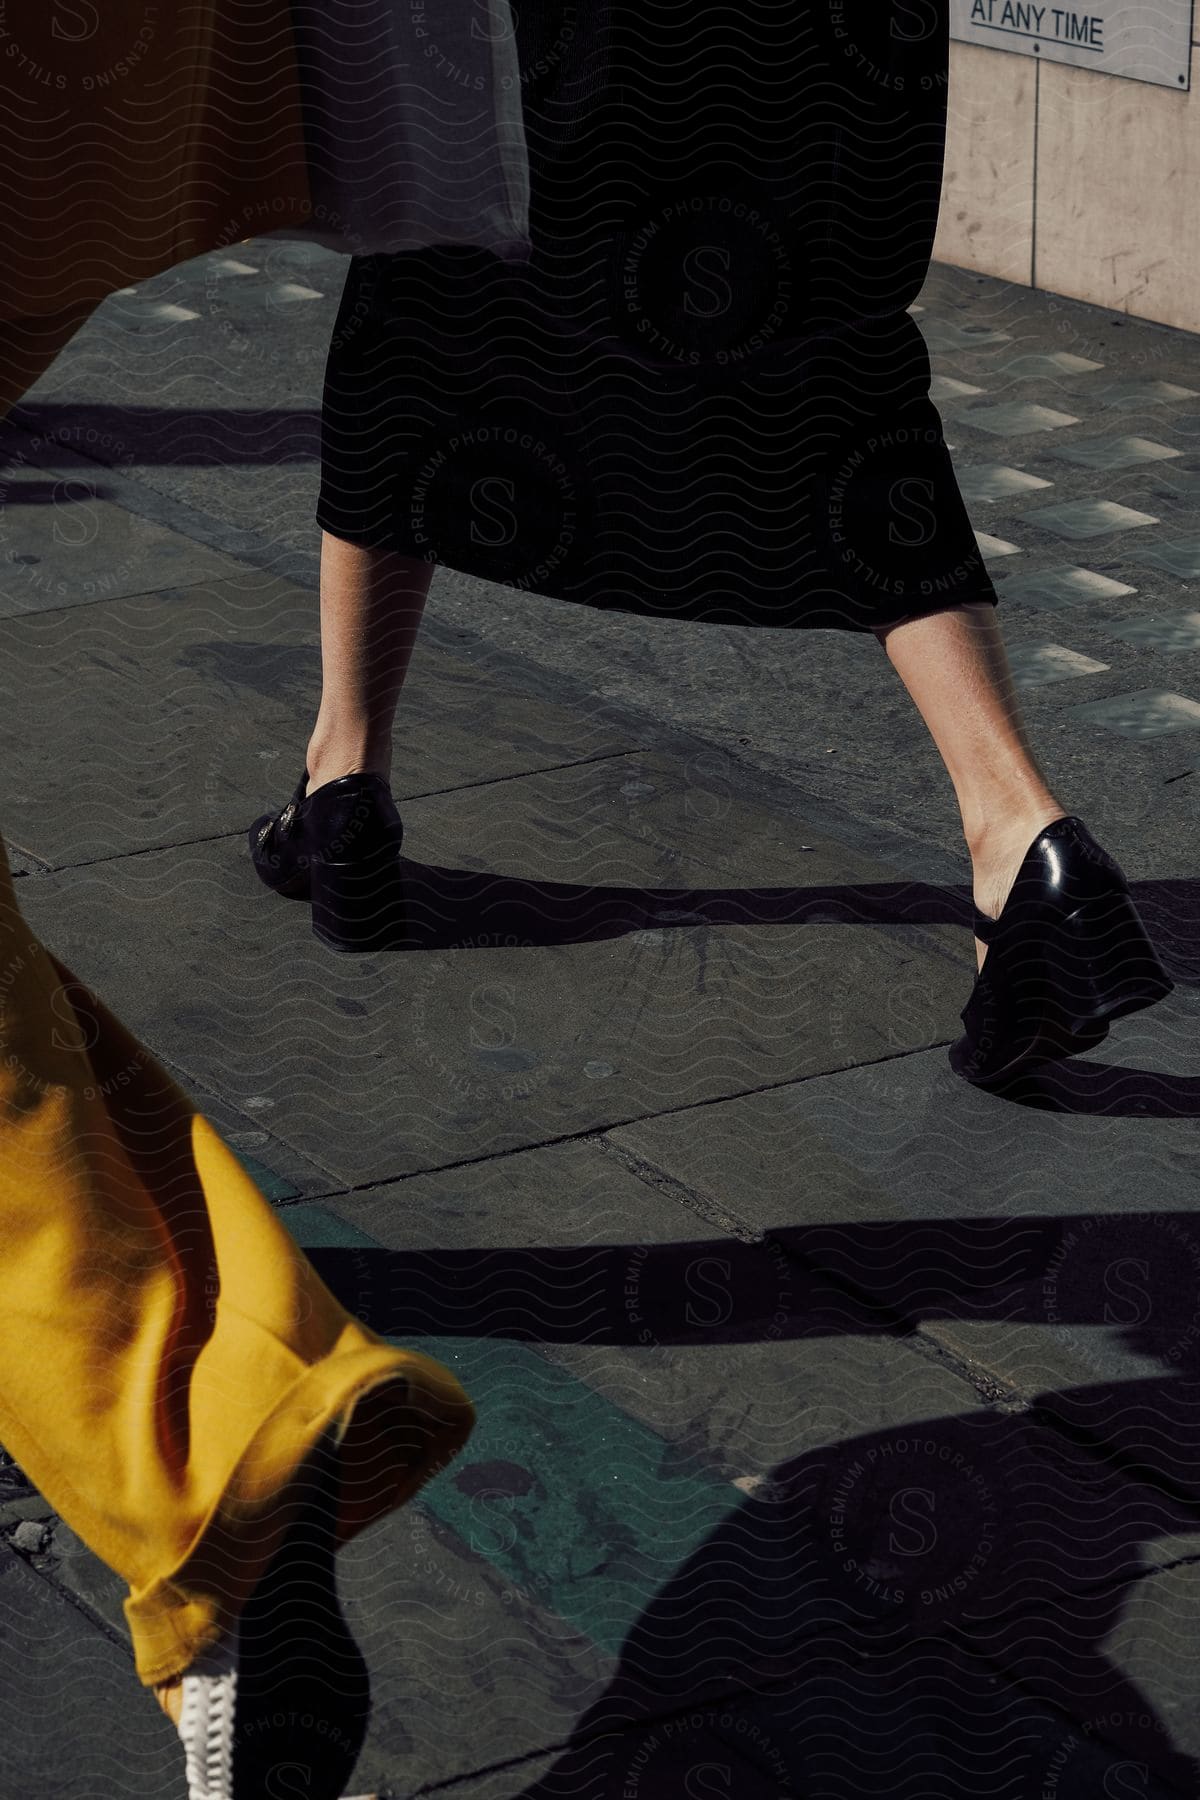 A person walking on a grey road wearing black high heels